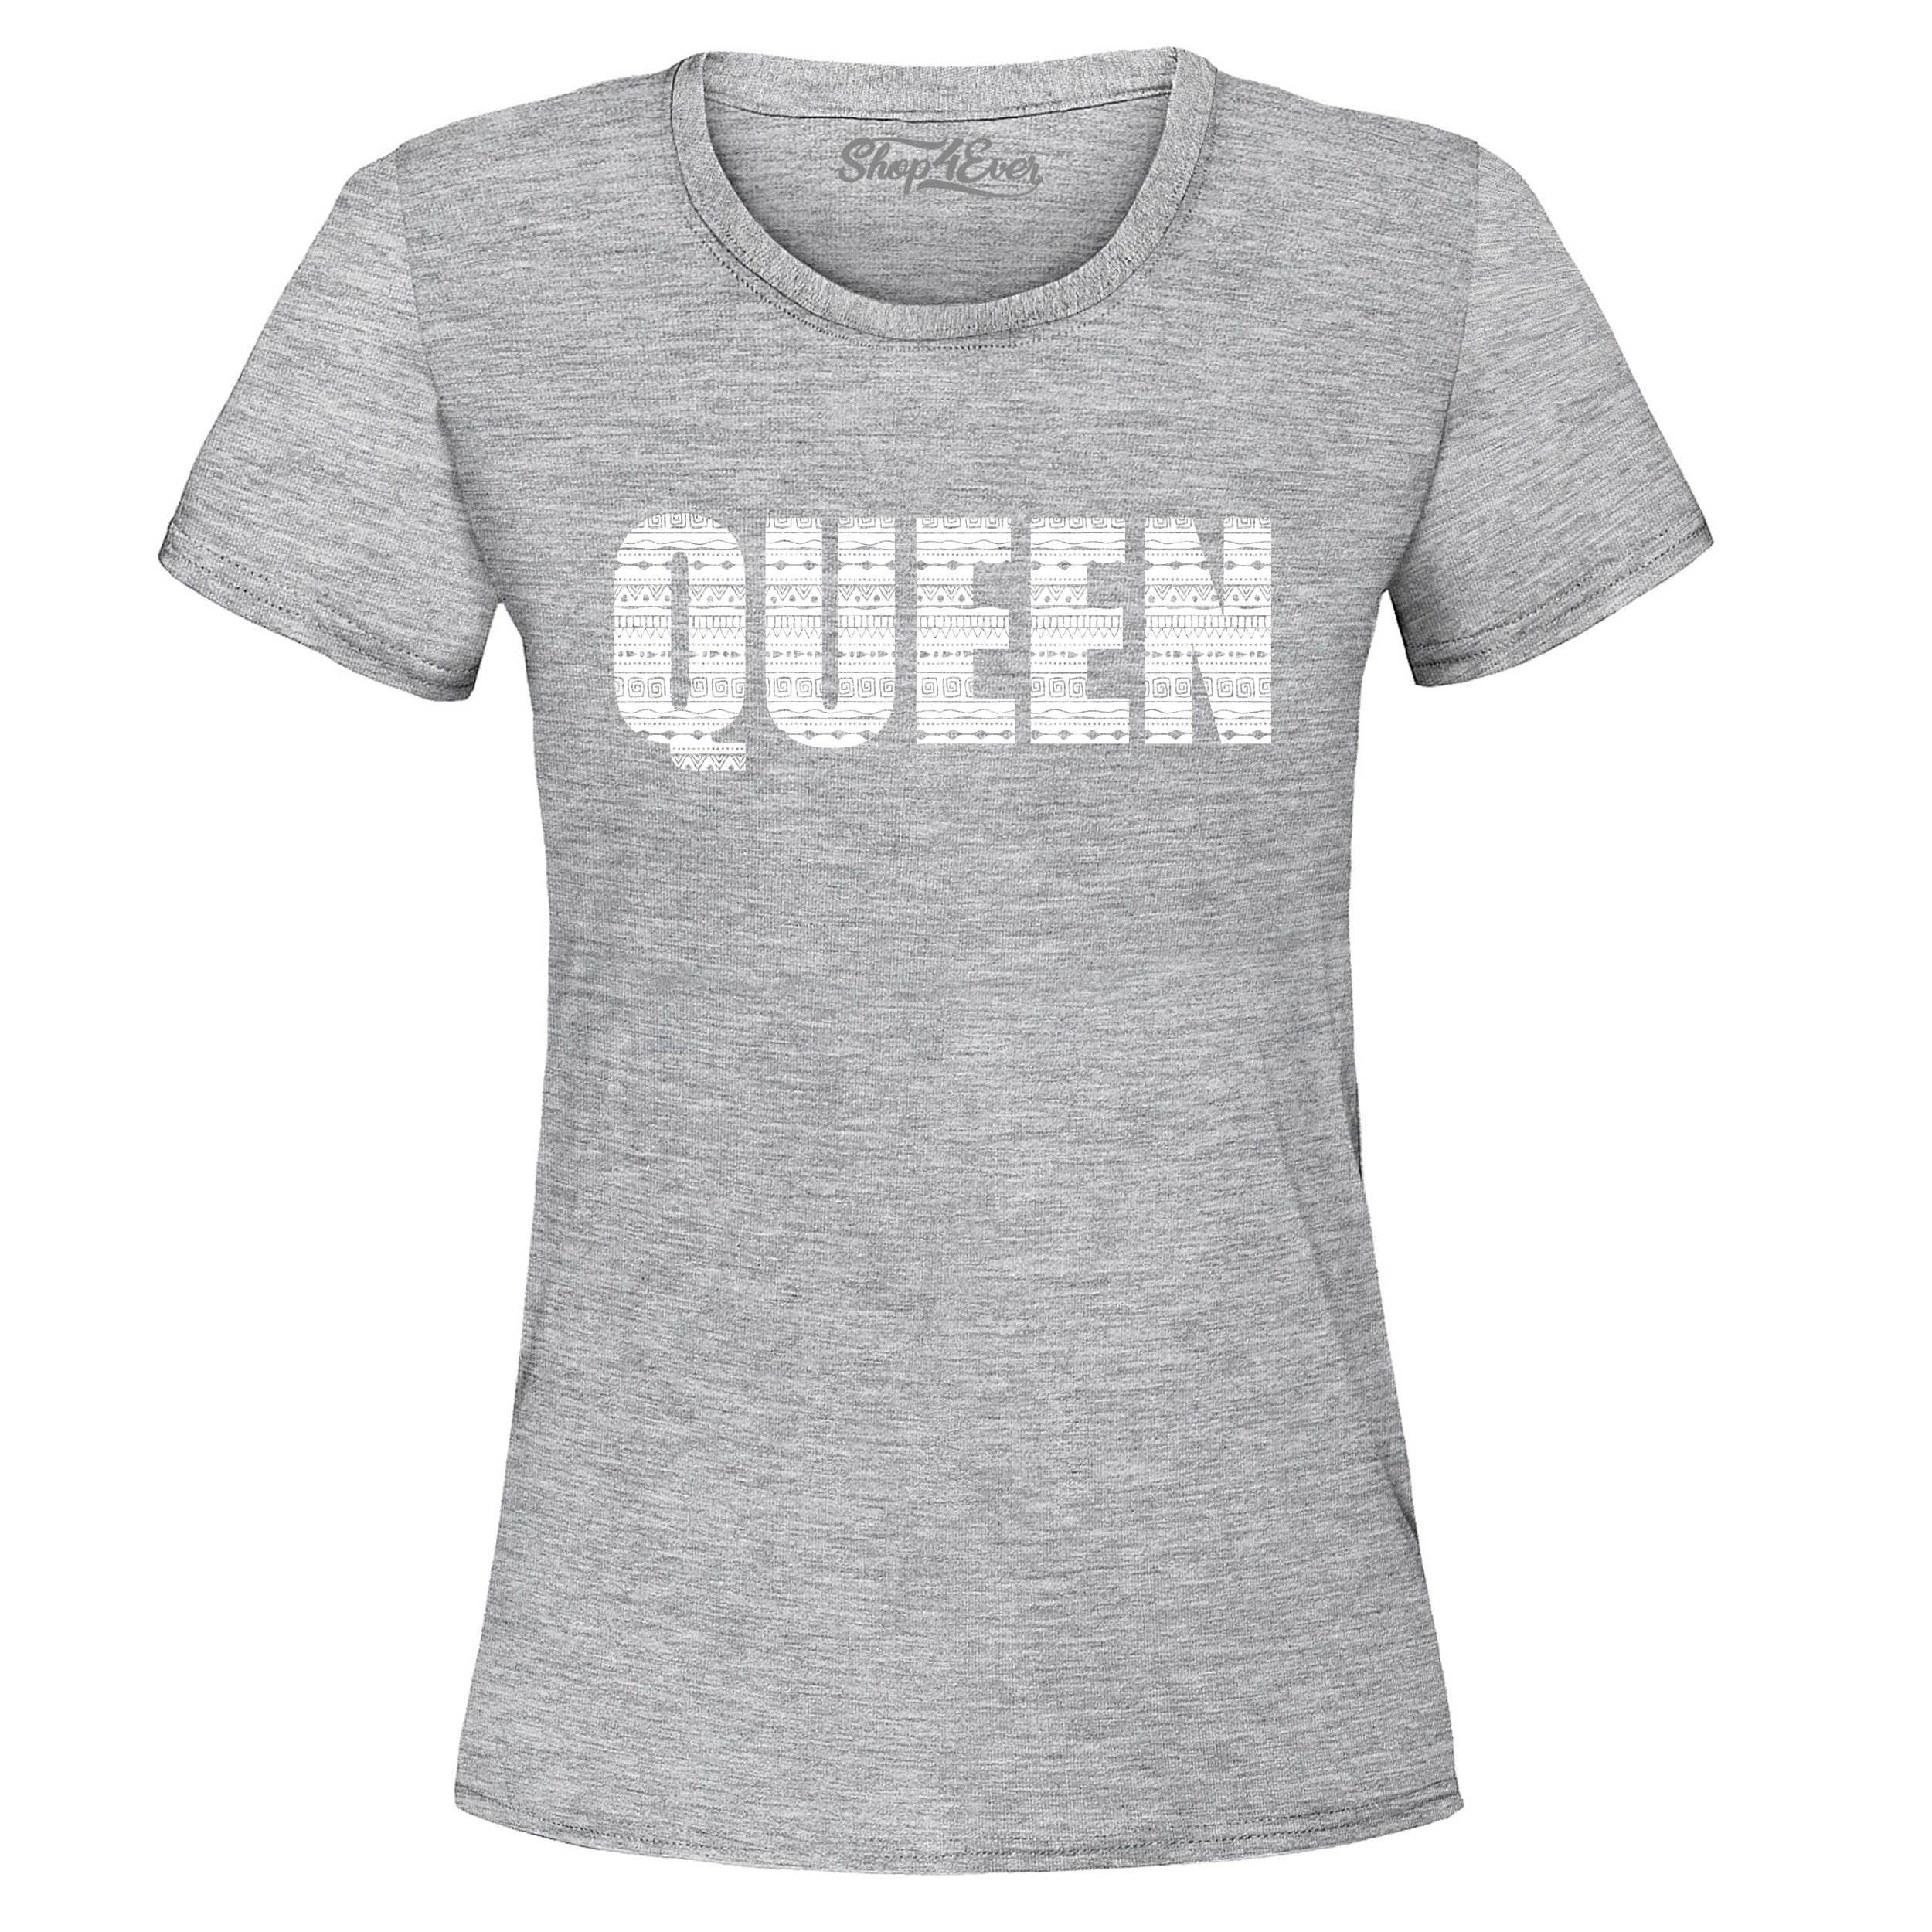 Shop4Ever Women's Queen African Pattern Style Graphic T-Shirt 